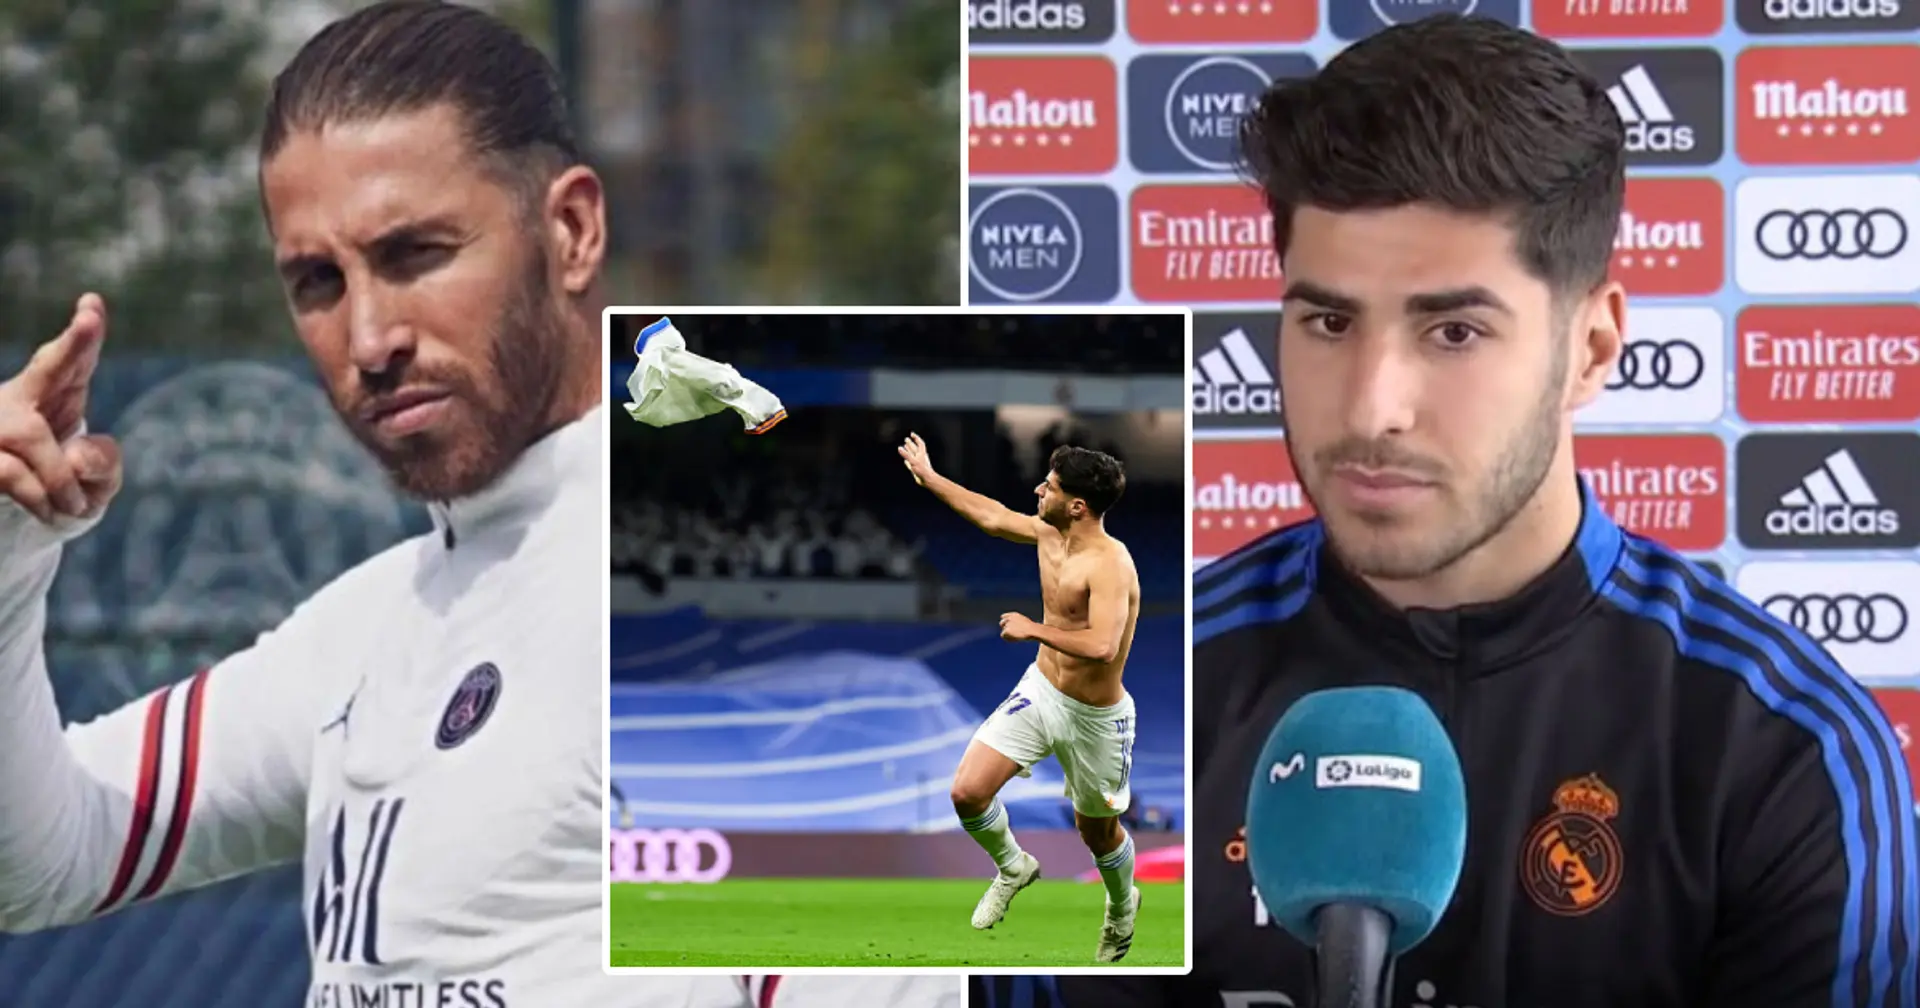 Asensio reveals what Sergio Ramos told him after his super goal against Granada